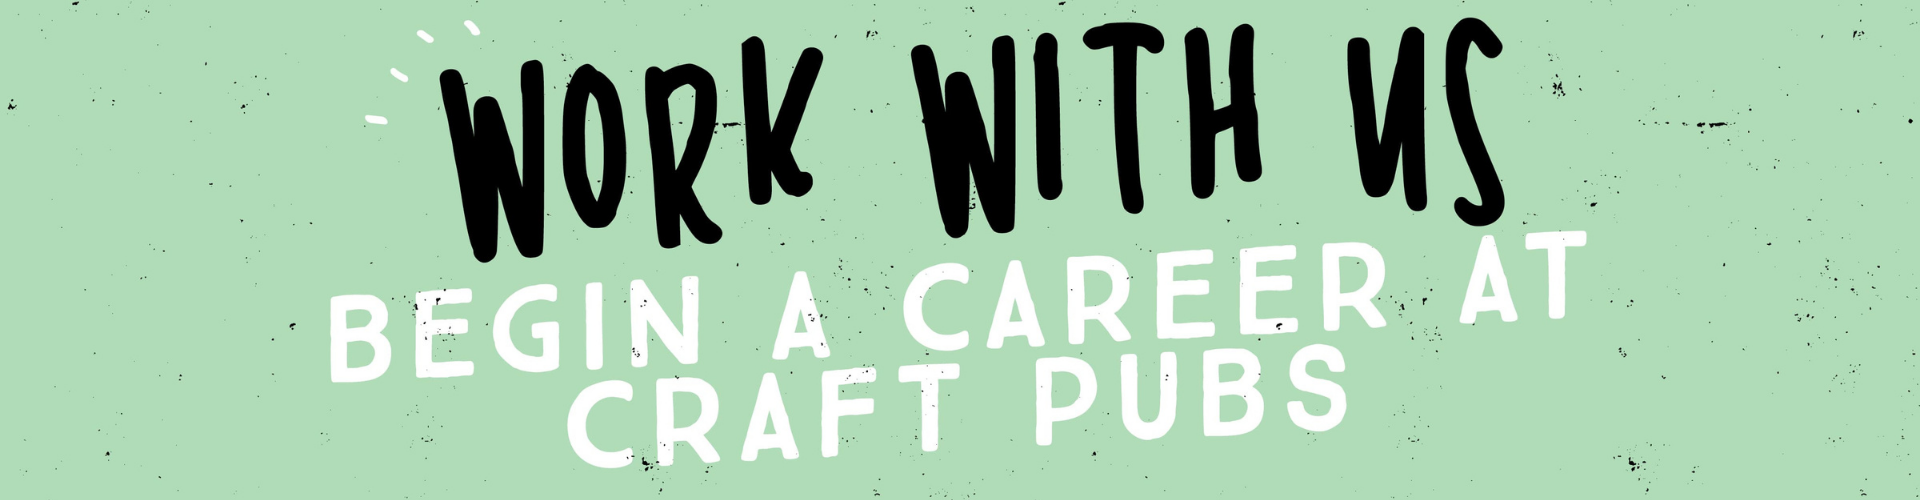 Work With Us - Begin a Career at Craft Pubs